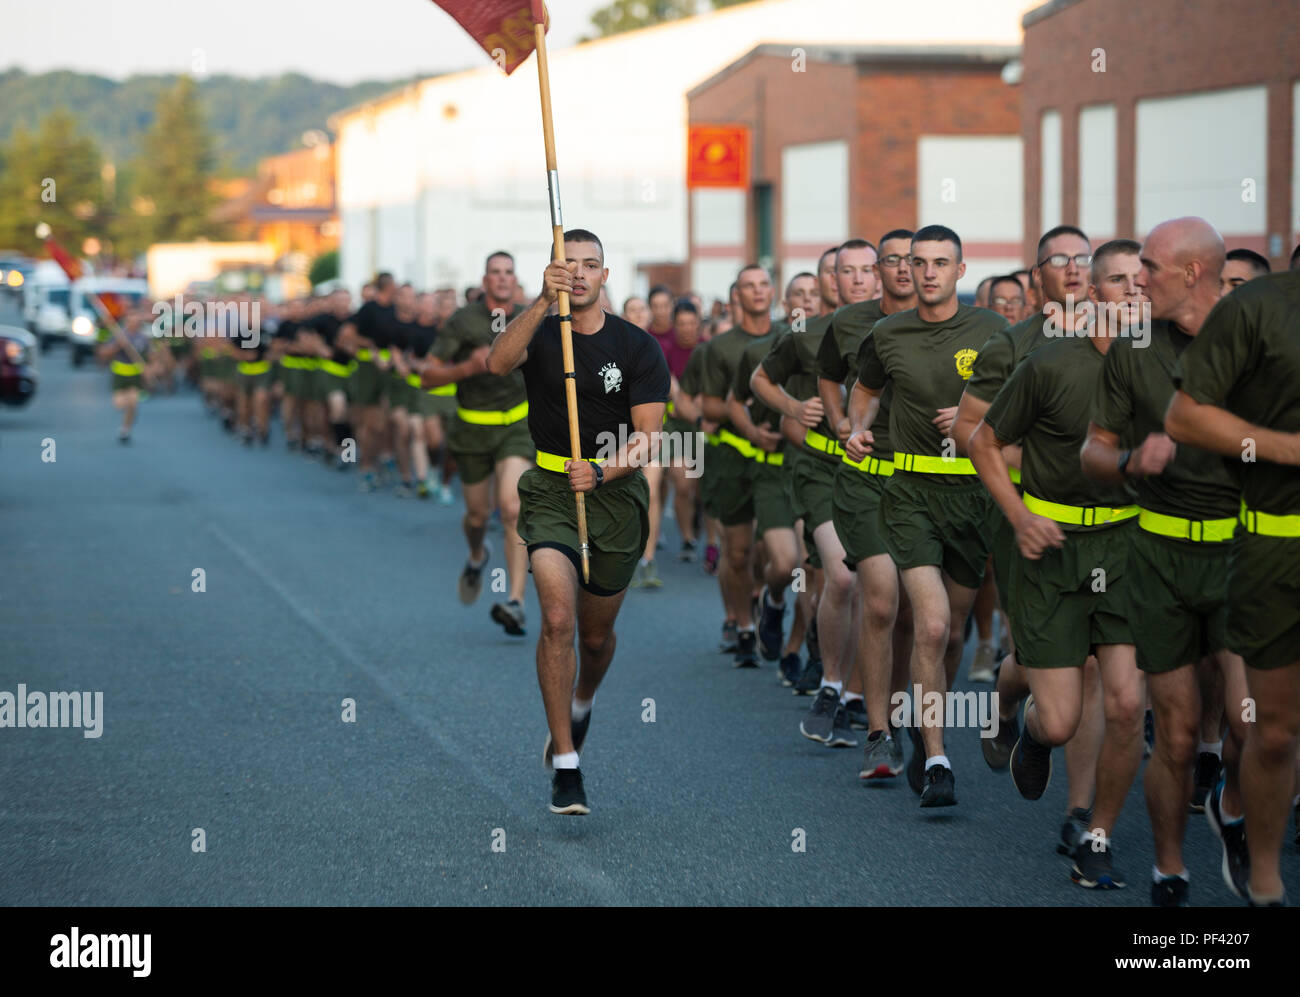 U.S. Marine Corps officer candidates with the Officer Candidates School and their families attend a Motivational Run on Marine Corps Base Quantico, Va., Aug. 10, 2018.The Run was part of the Officer Candidates School completion ceremony. (U.S. Marine Corps photo by Pfc. Yuritzy Gomez) Stock Photo